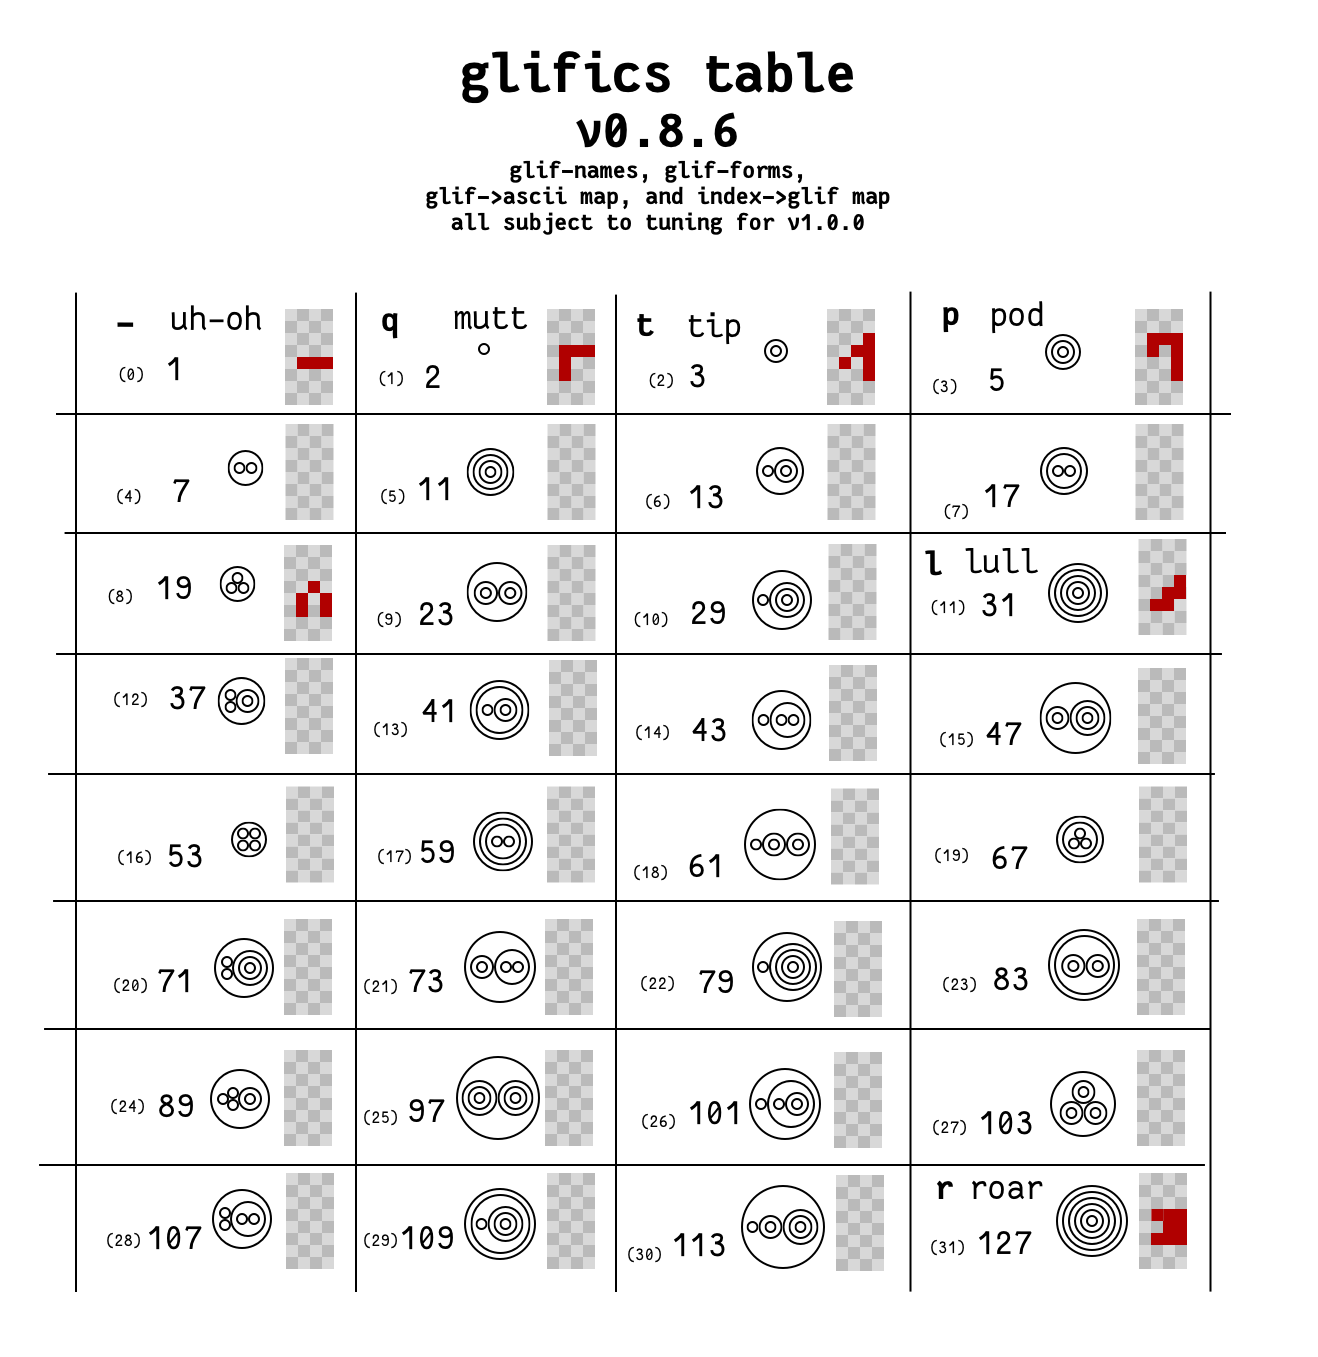 a table of of glifs, their names, their keyboard characters, and most crucially, their associated primes